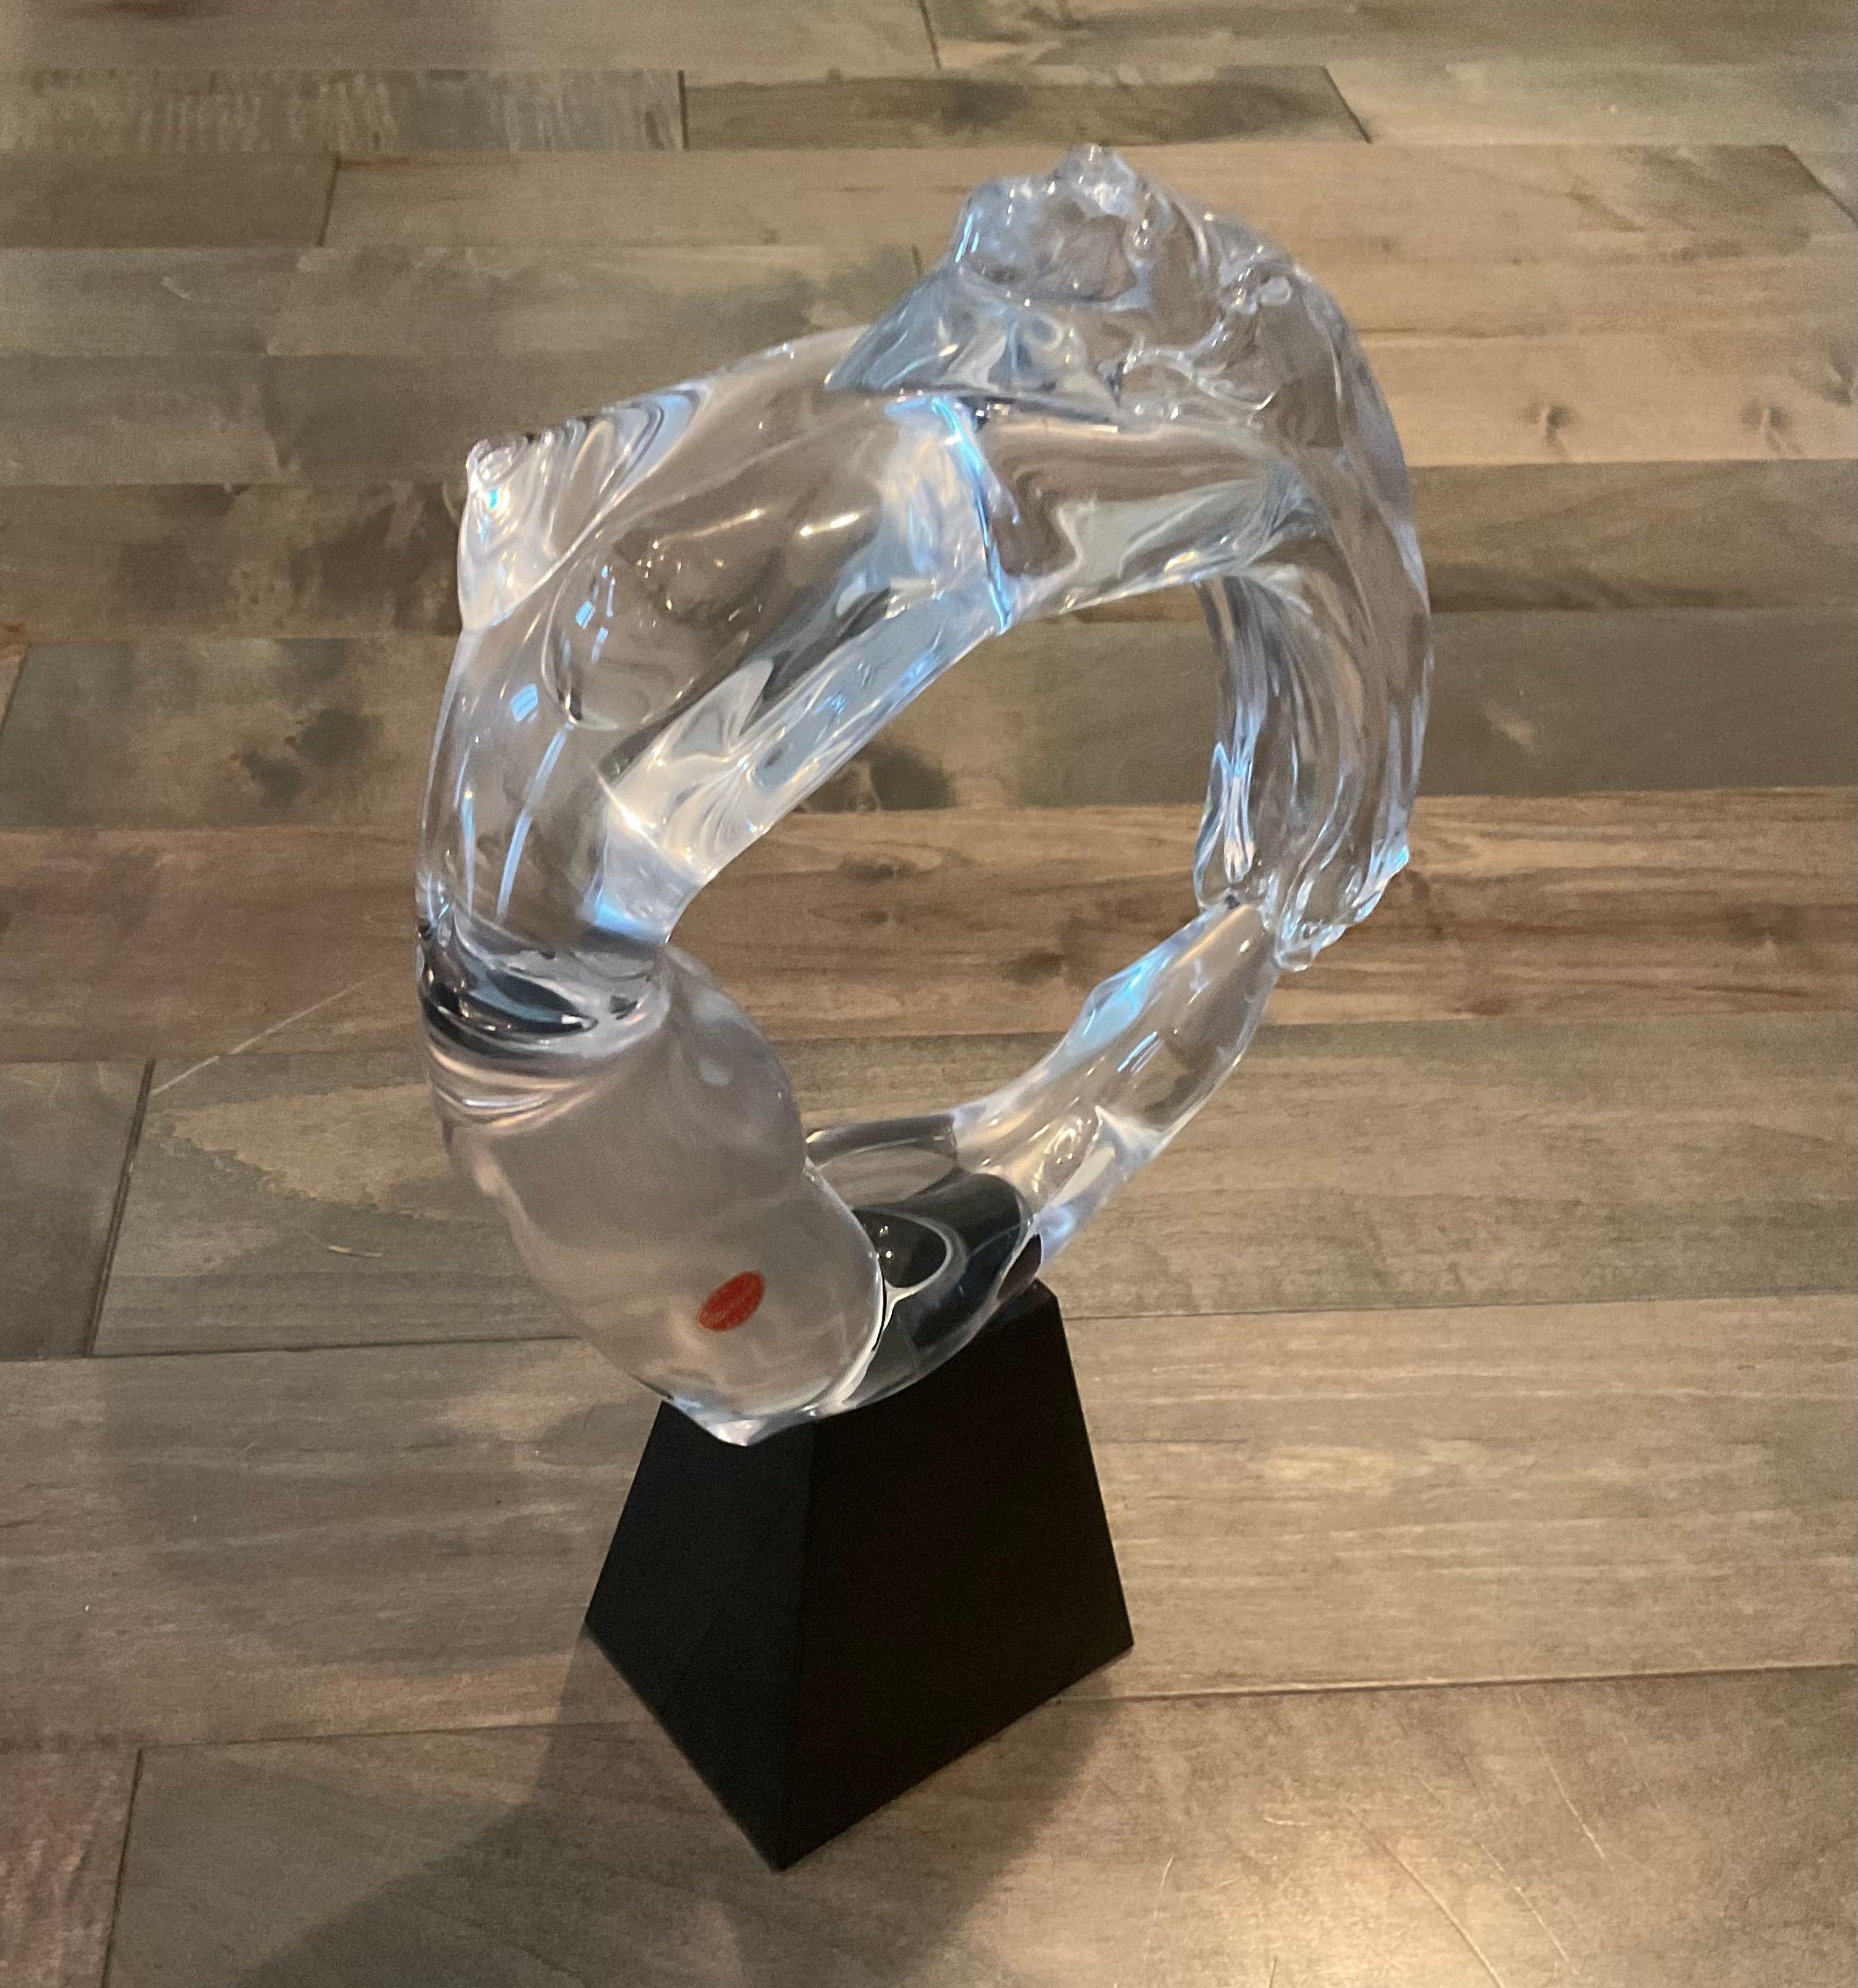 Mid-Century Modern Pino Signoretto Murano Art Glass Nude Sculpture Signed by the Artist For Sale